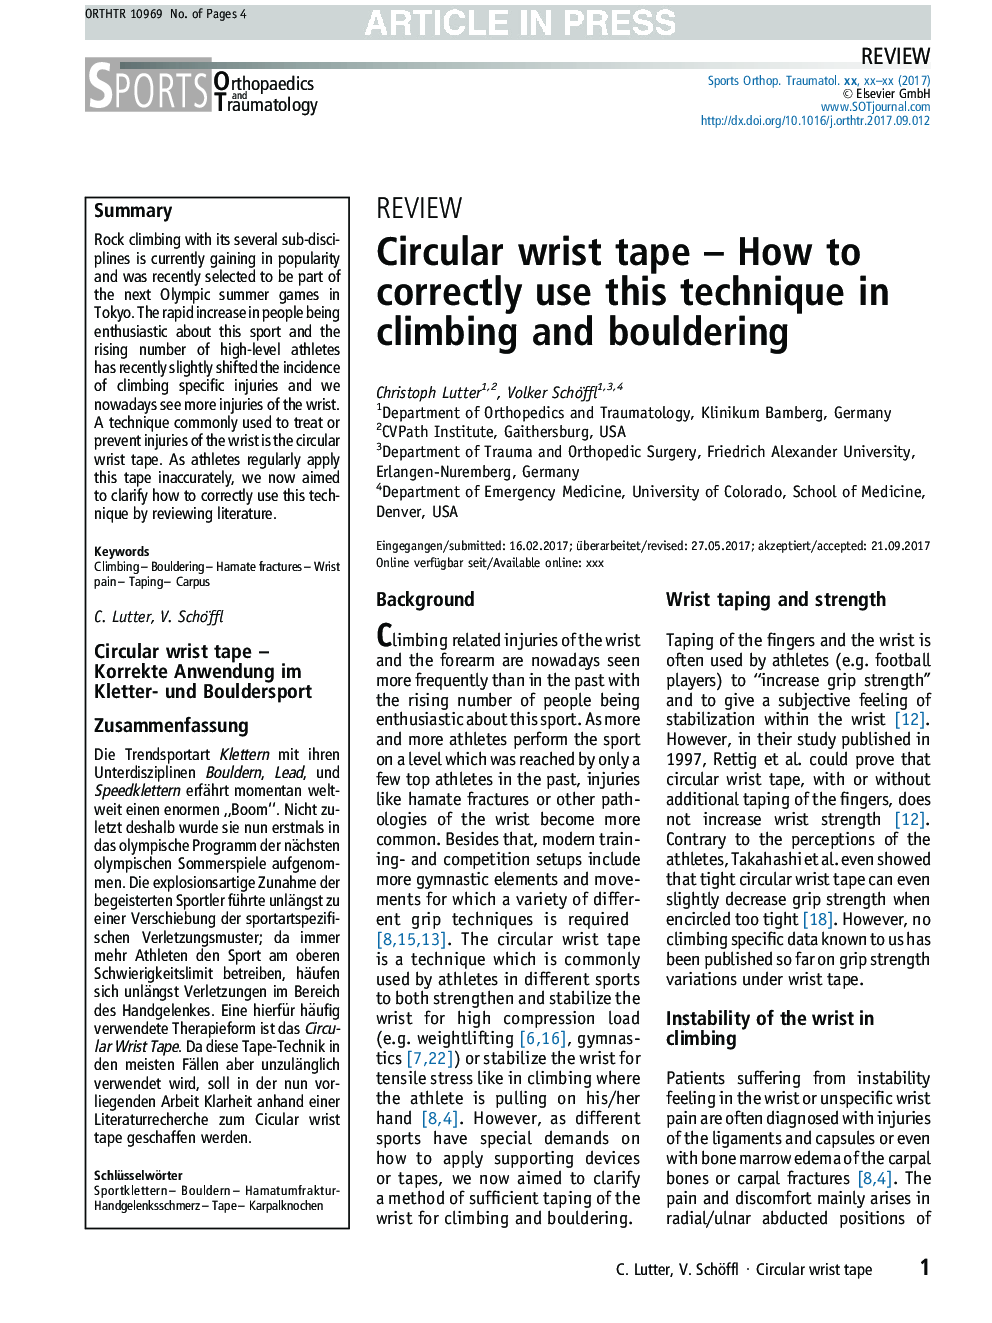 Circular wrist tape - How to correctly use this technique in climbing and bouldering